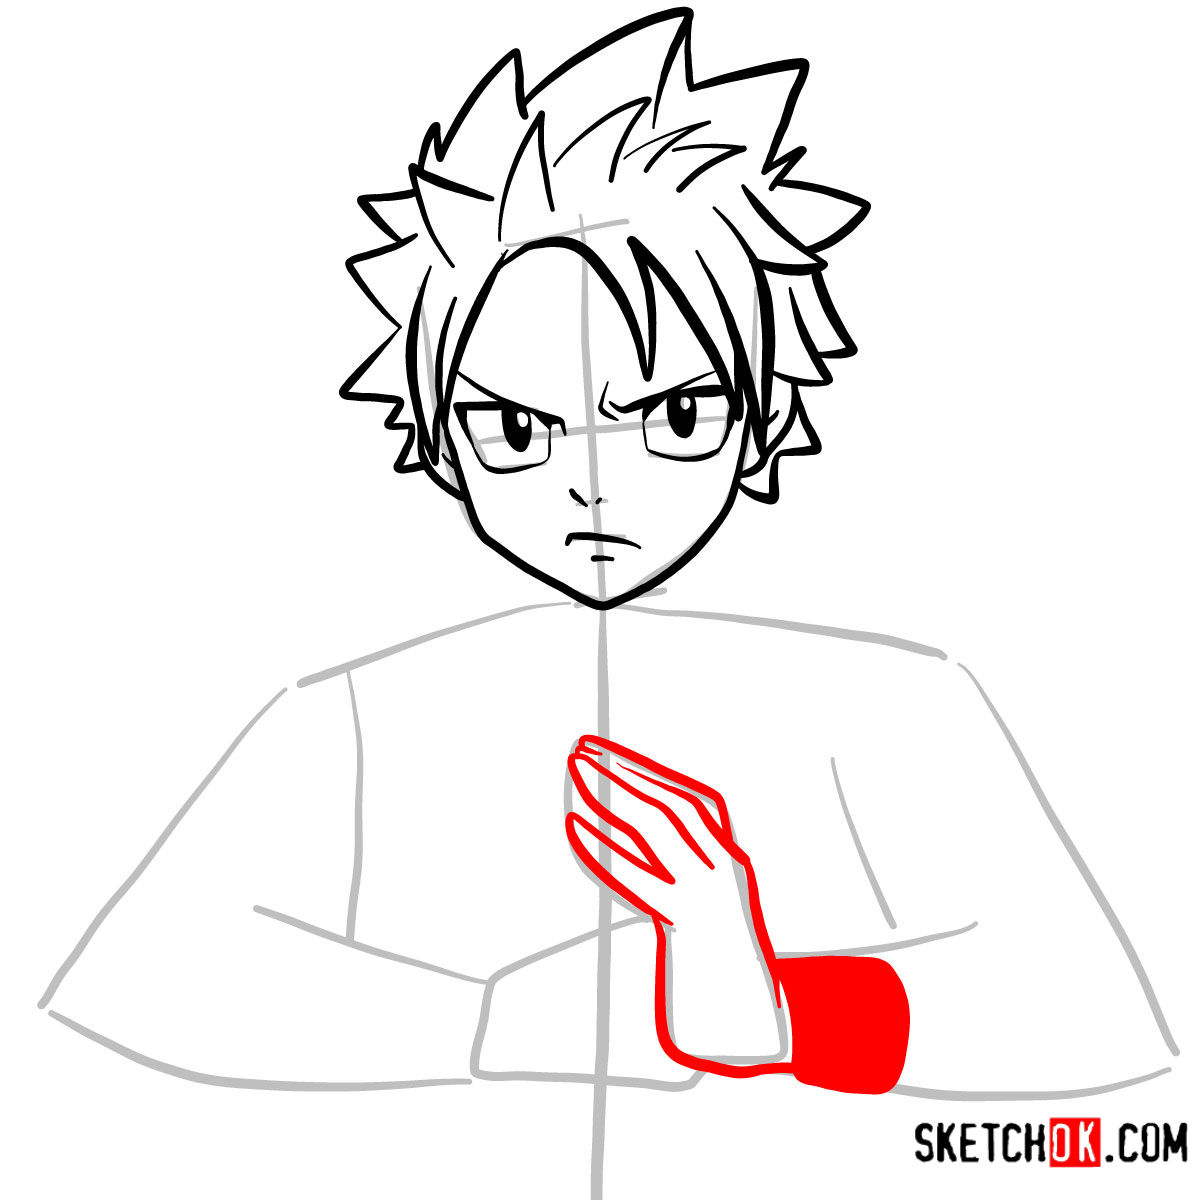 How to draw Natsu Dragneel's face | Fairy Tail - step 06